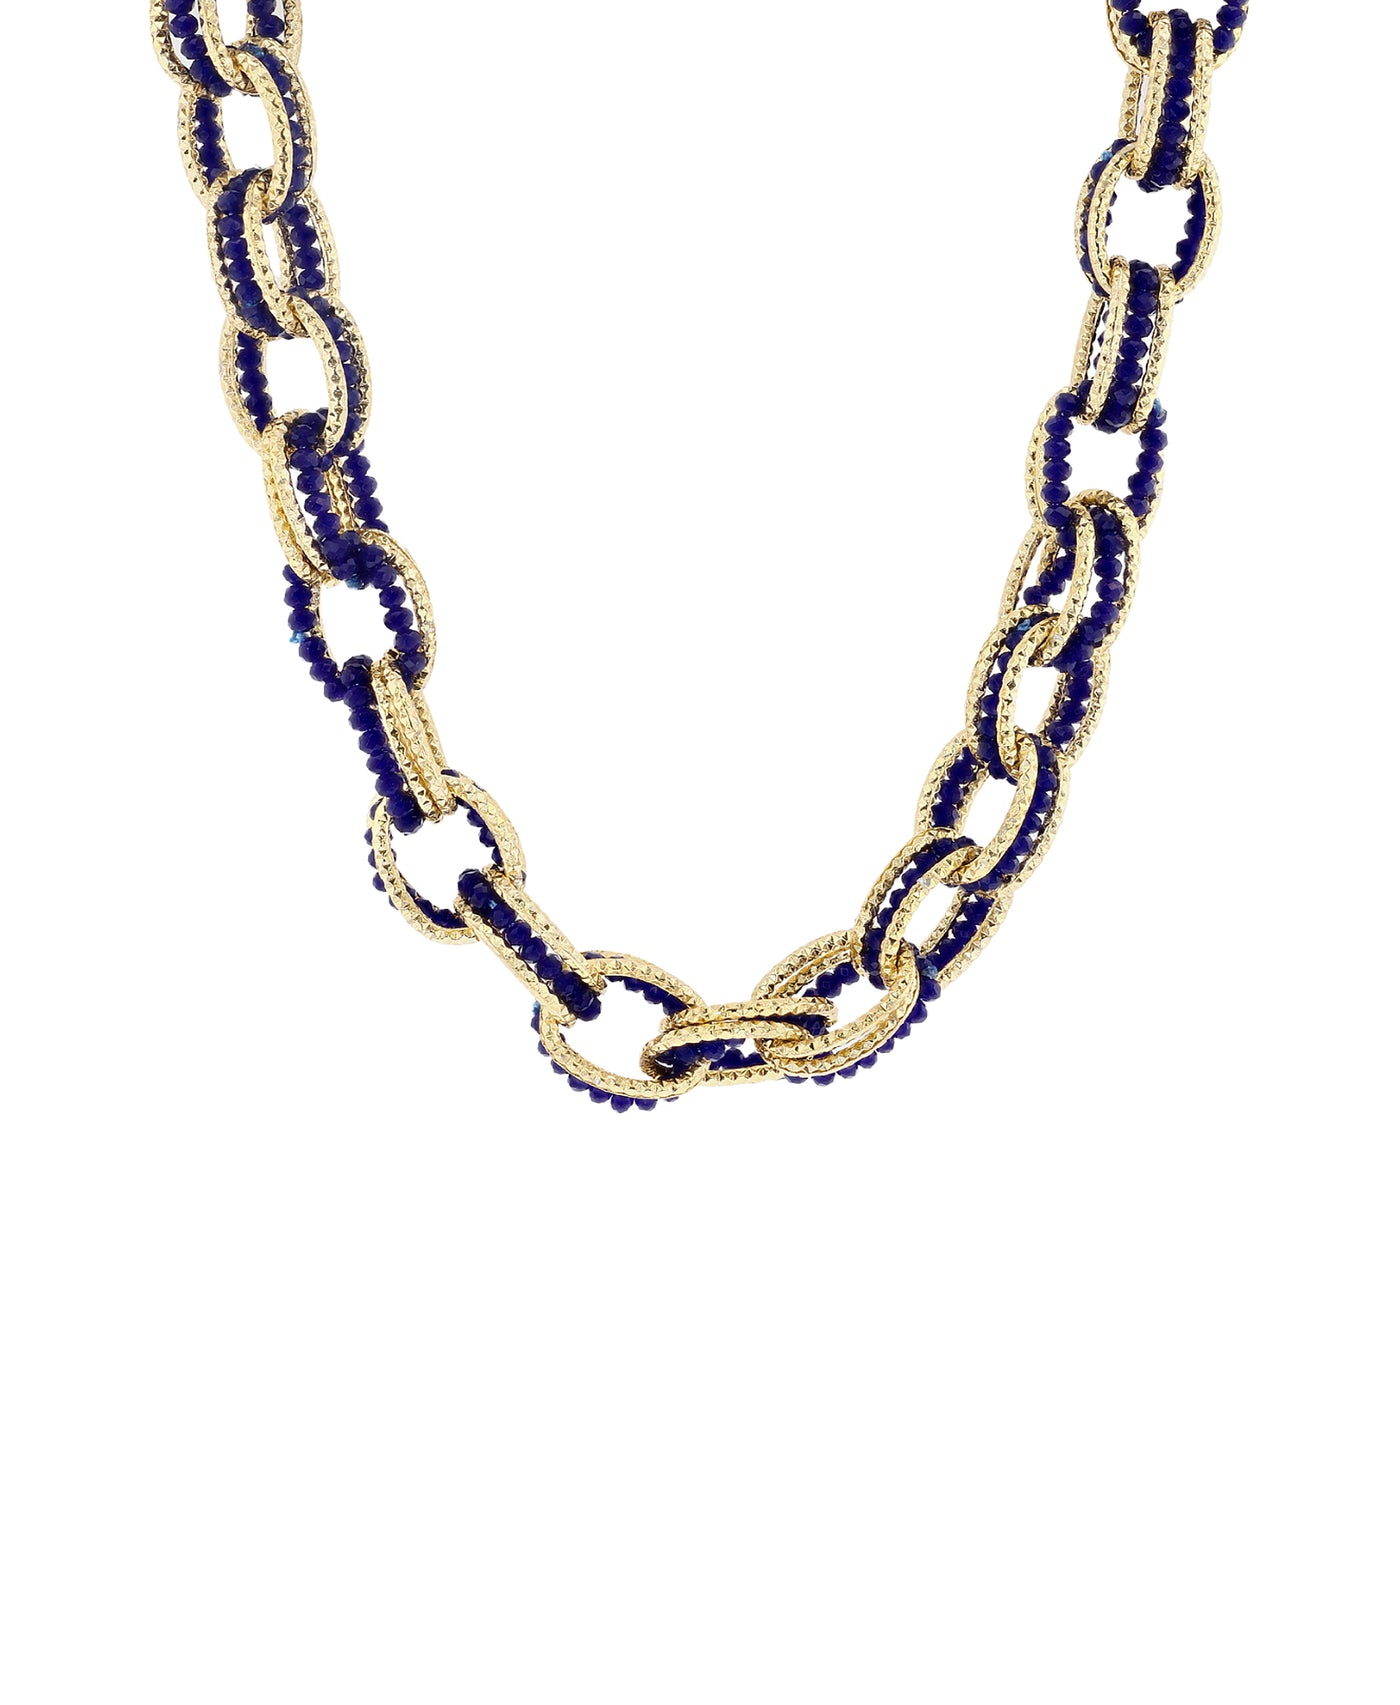 Chain & Bead Necklace image 1